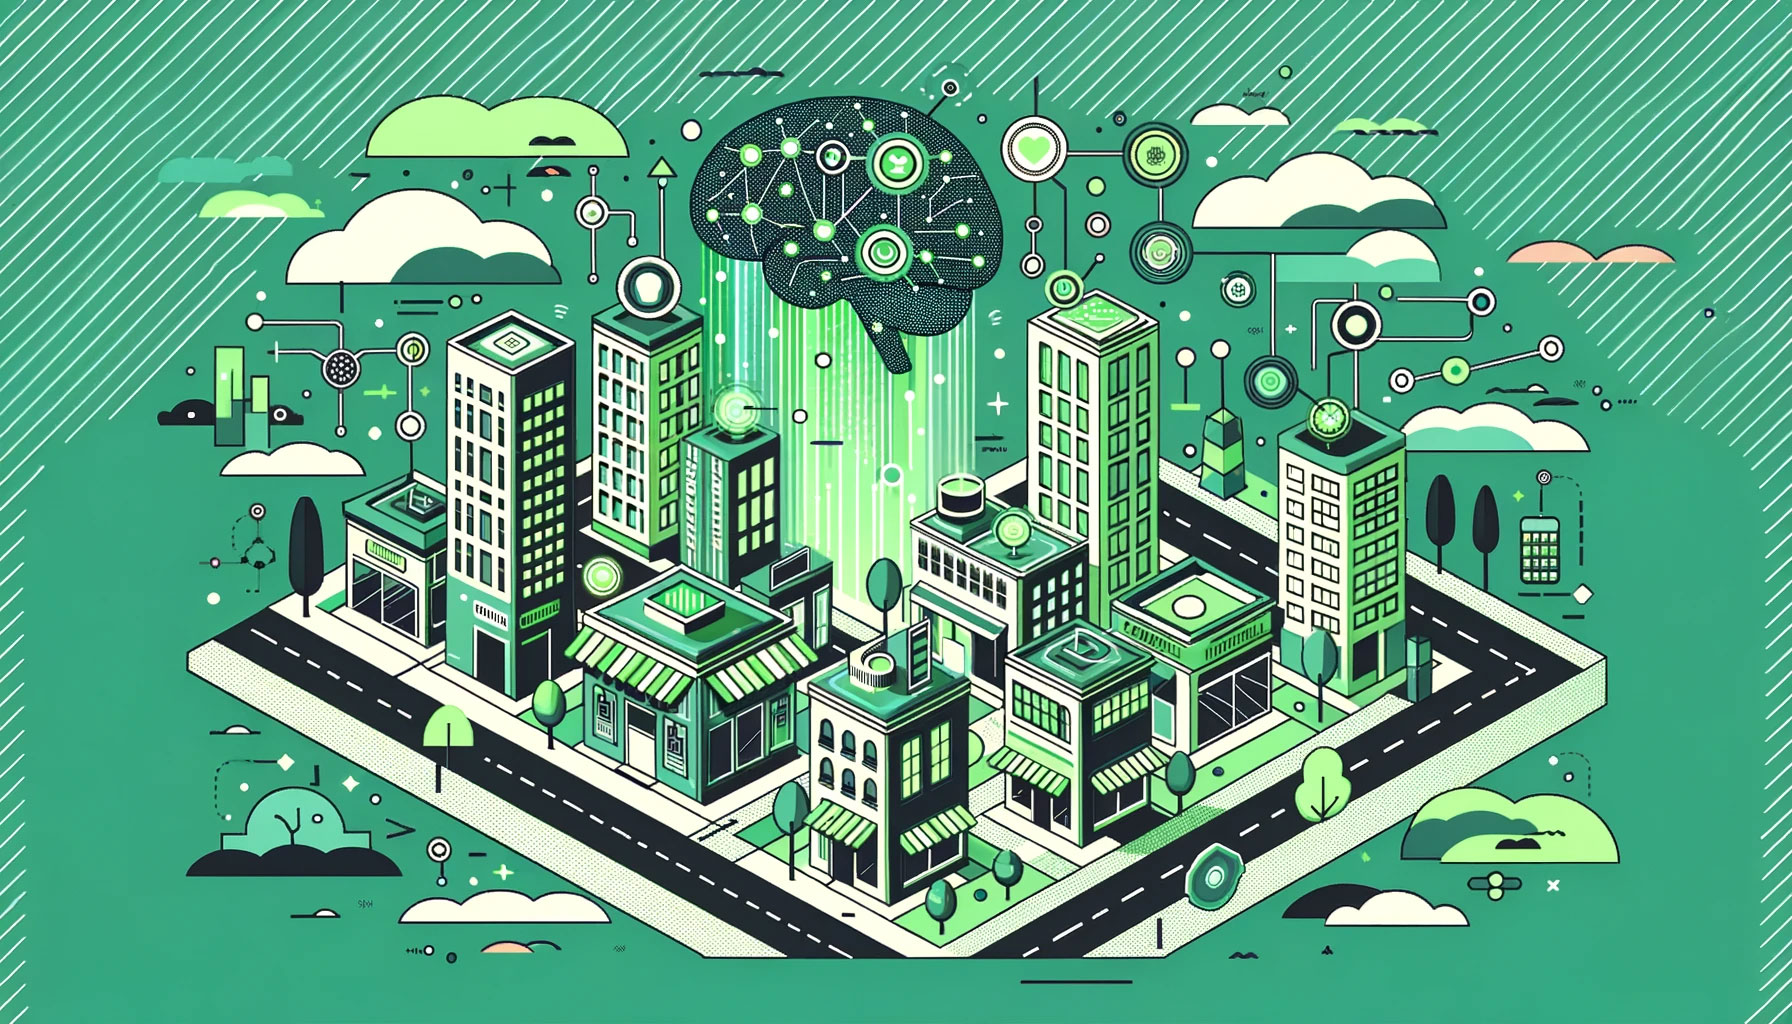 Illustration depicting a modern cityscape where the buildings, roads, and skies are colored using shades of green. Small businesses in this cityscape have digital screens and devices, all glowing in the same green shade. They are powered by a central AI hub depicted as a glowing brain in the same color. 